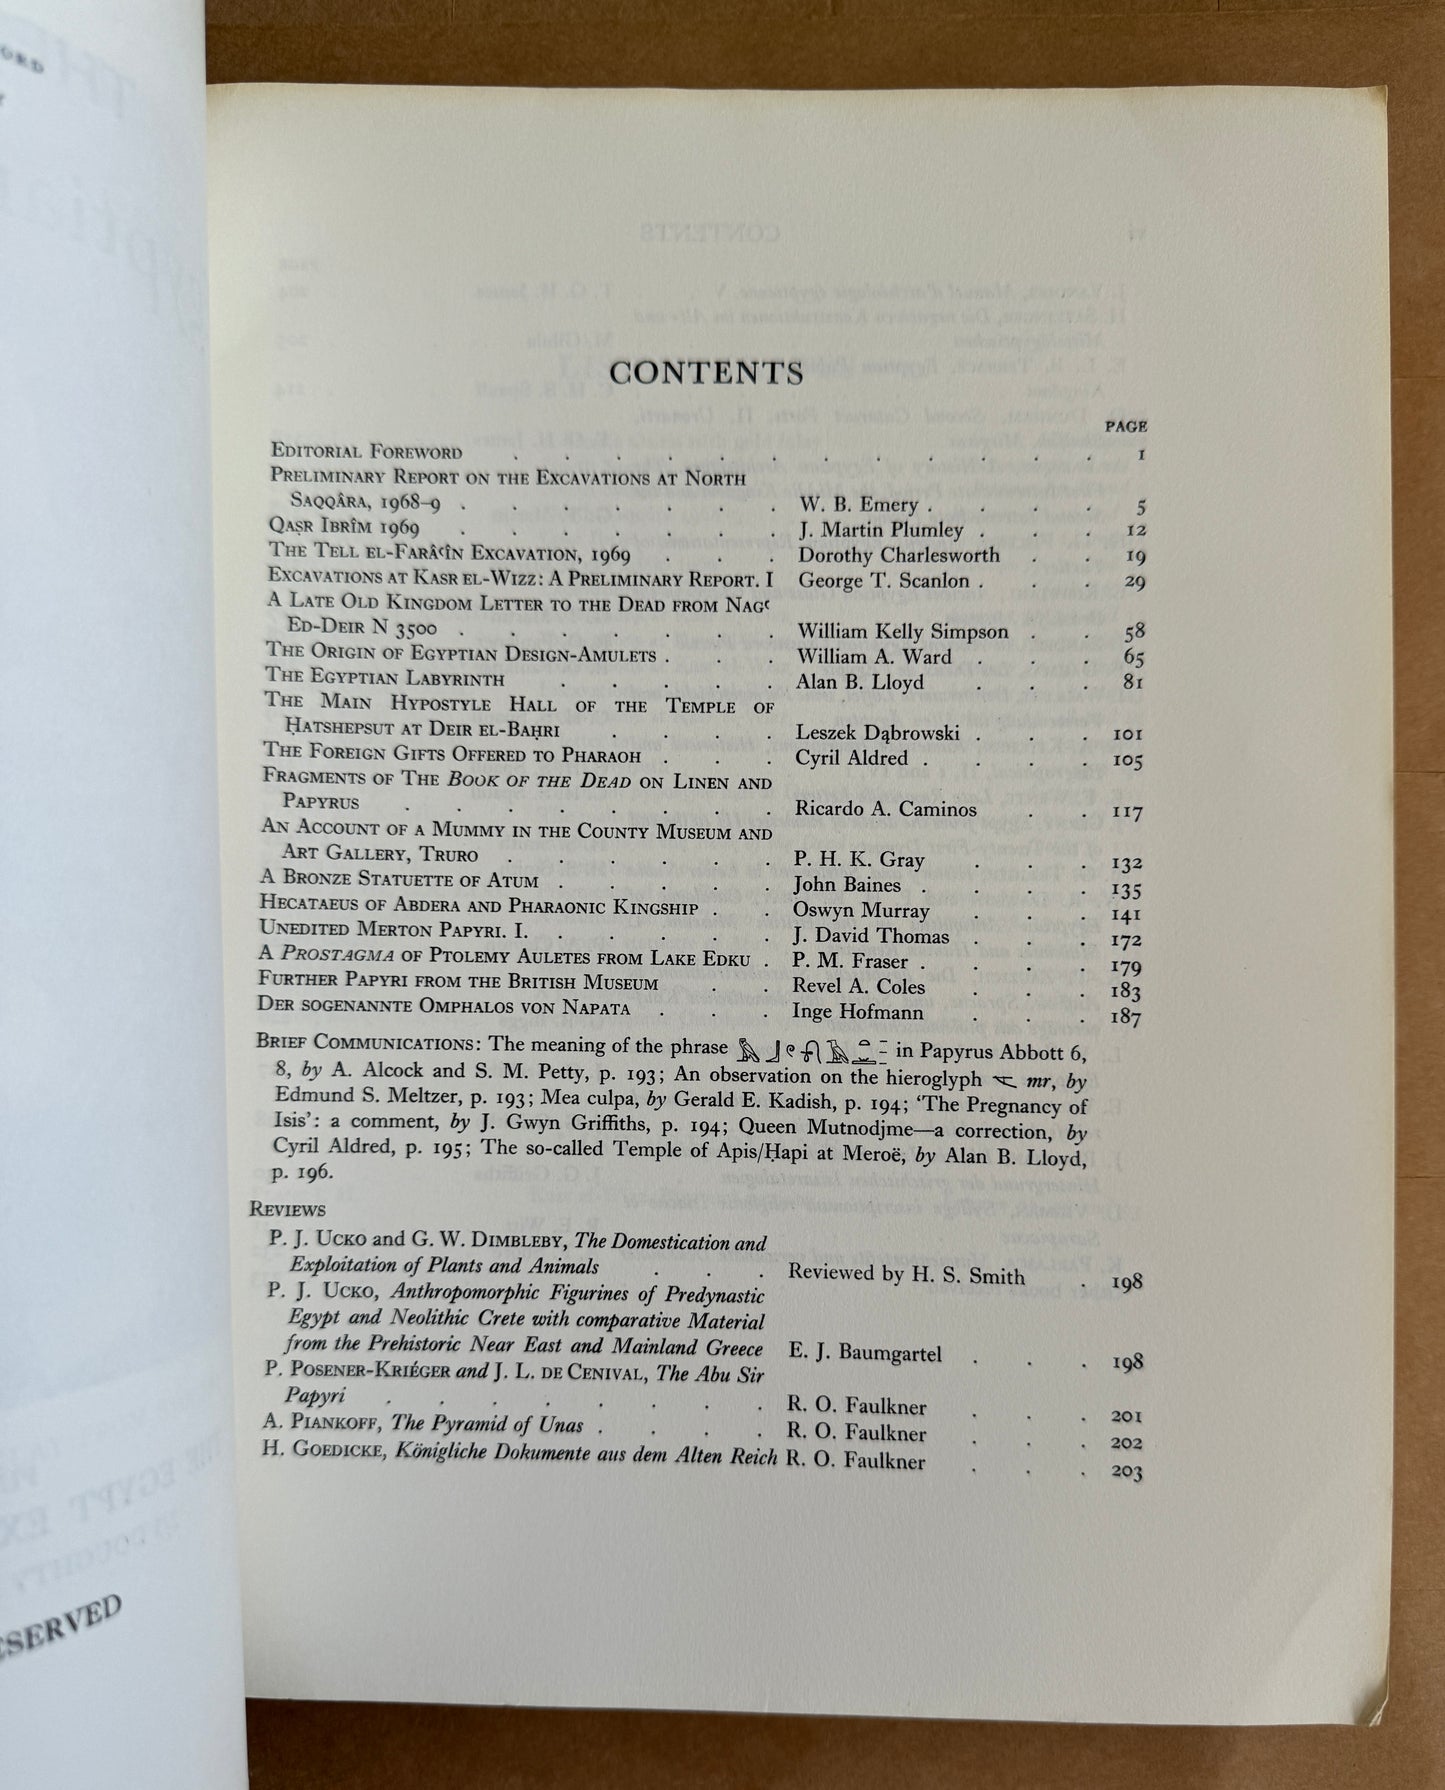 The Journal of Egyptian Archaeology; Vol 56 ; August 1970